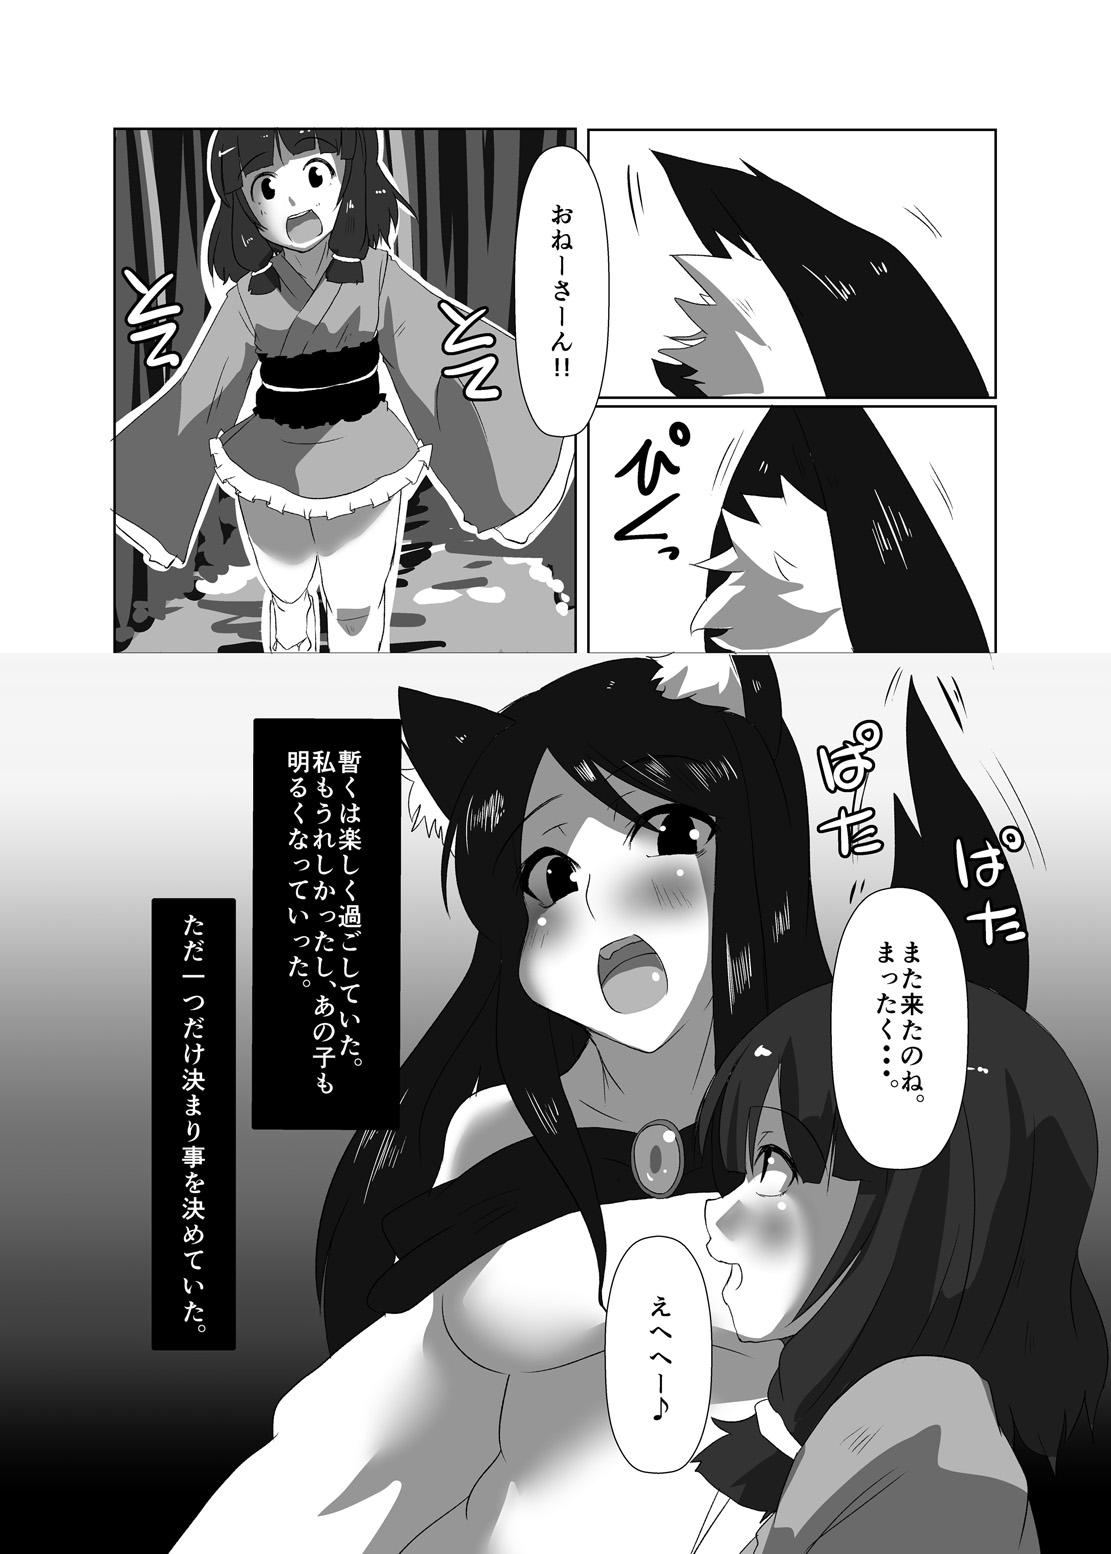 Danish ELonely Wolf no Onee-san - Touhou project Seduction - Page 12